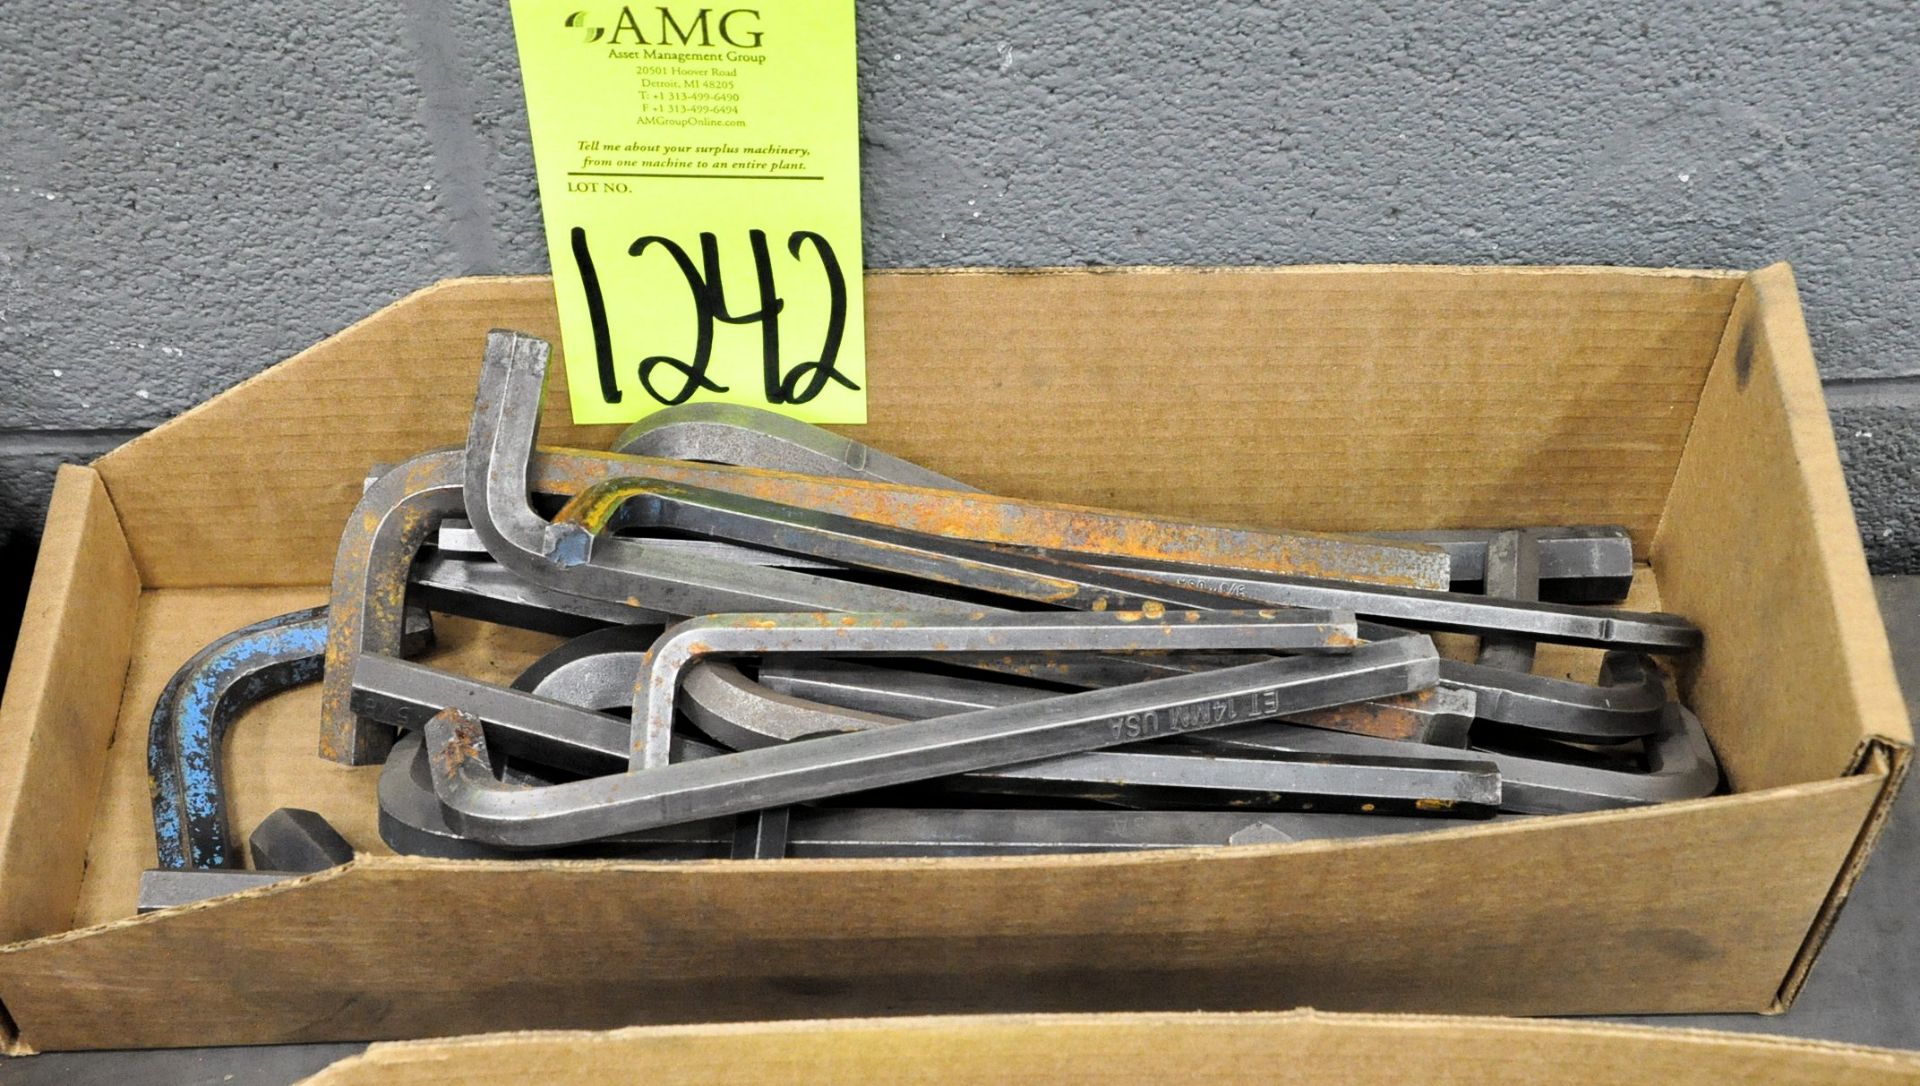 Lot-Large Allen Wrenches in (5) Boxes, (G-15), (Yellow Tag) - Image 3 of 3